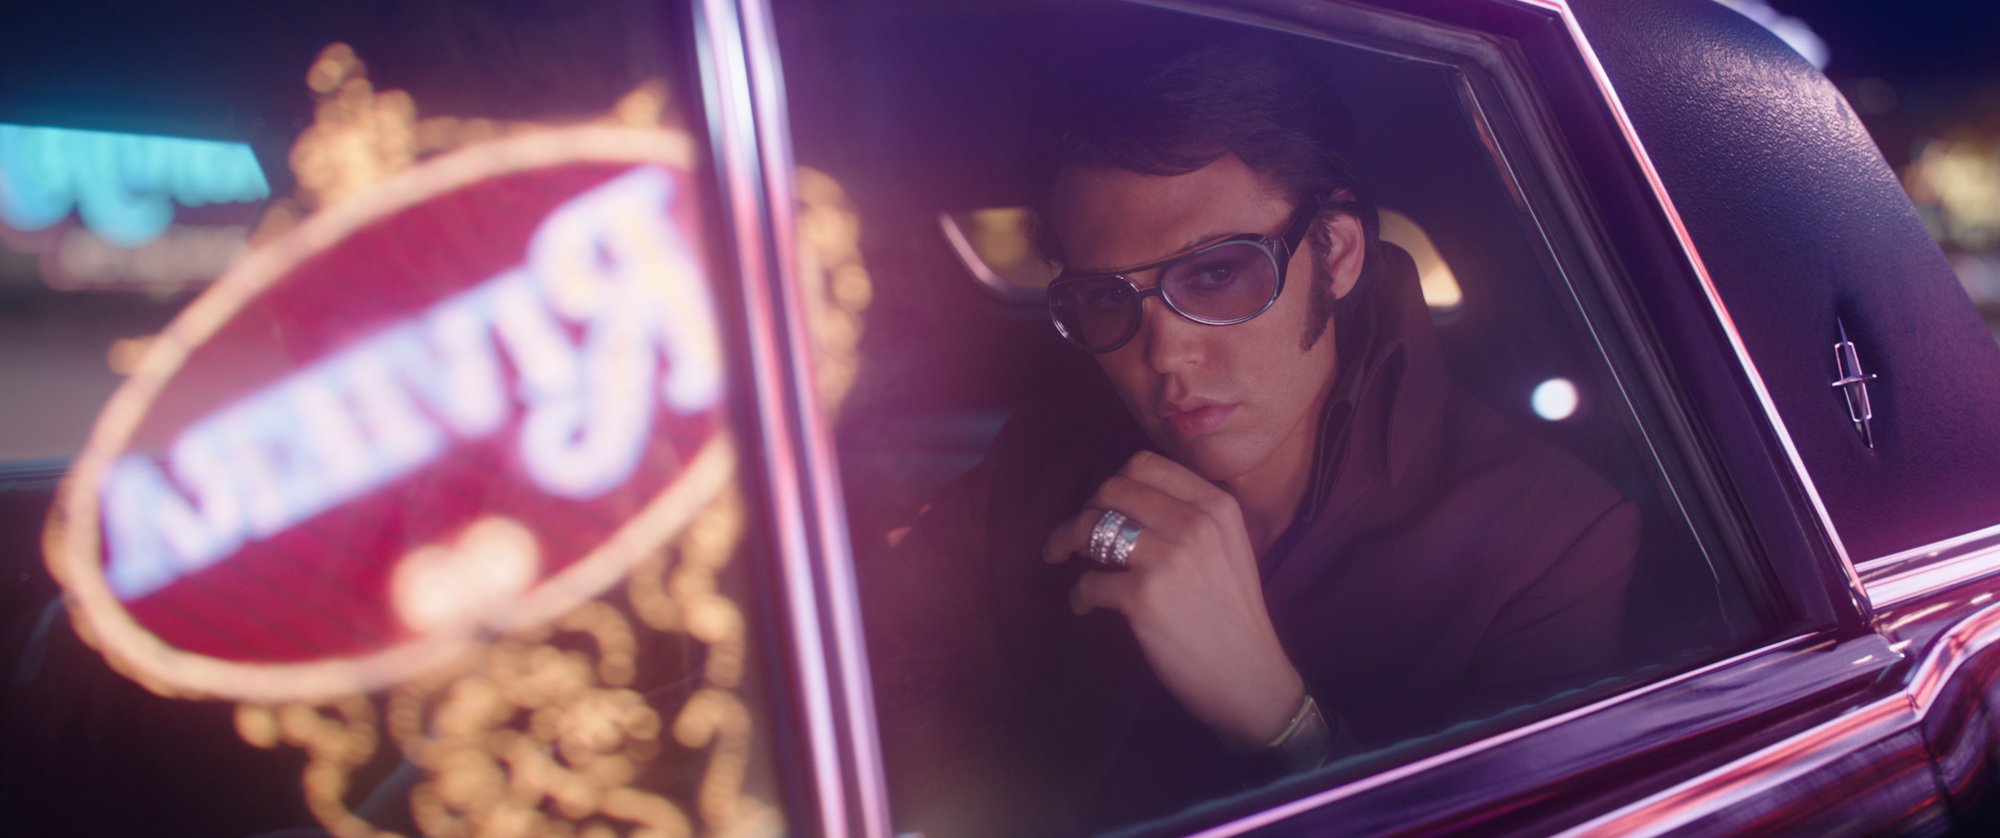 'Elvis' Austin Butler as Elvis Presley wearing sunglasses looking out of the car window with a neon sign reflected in the glass